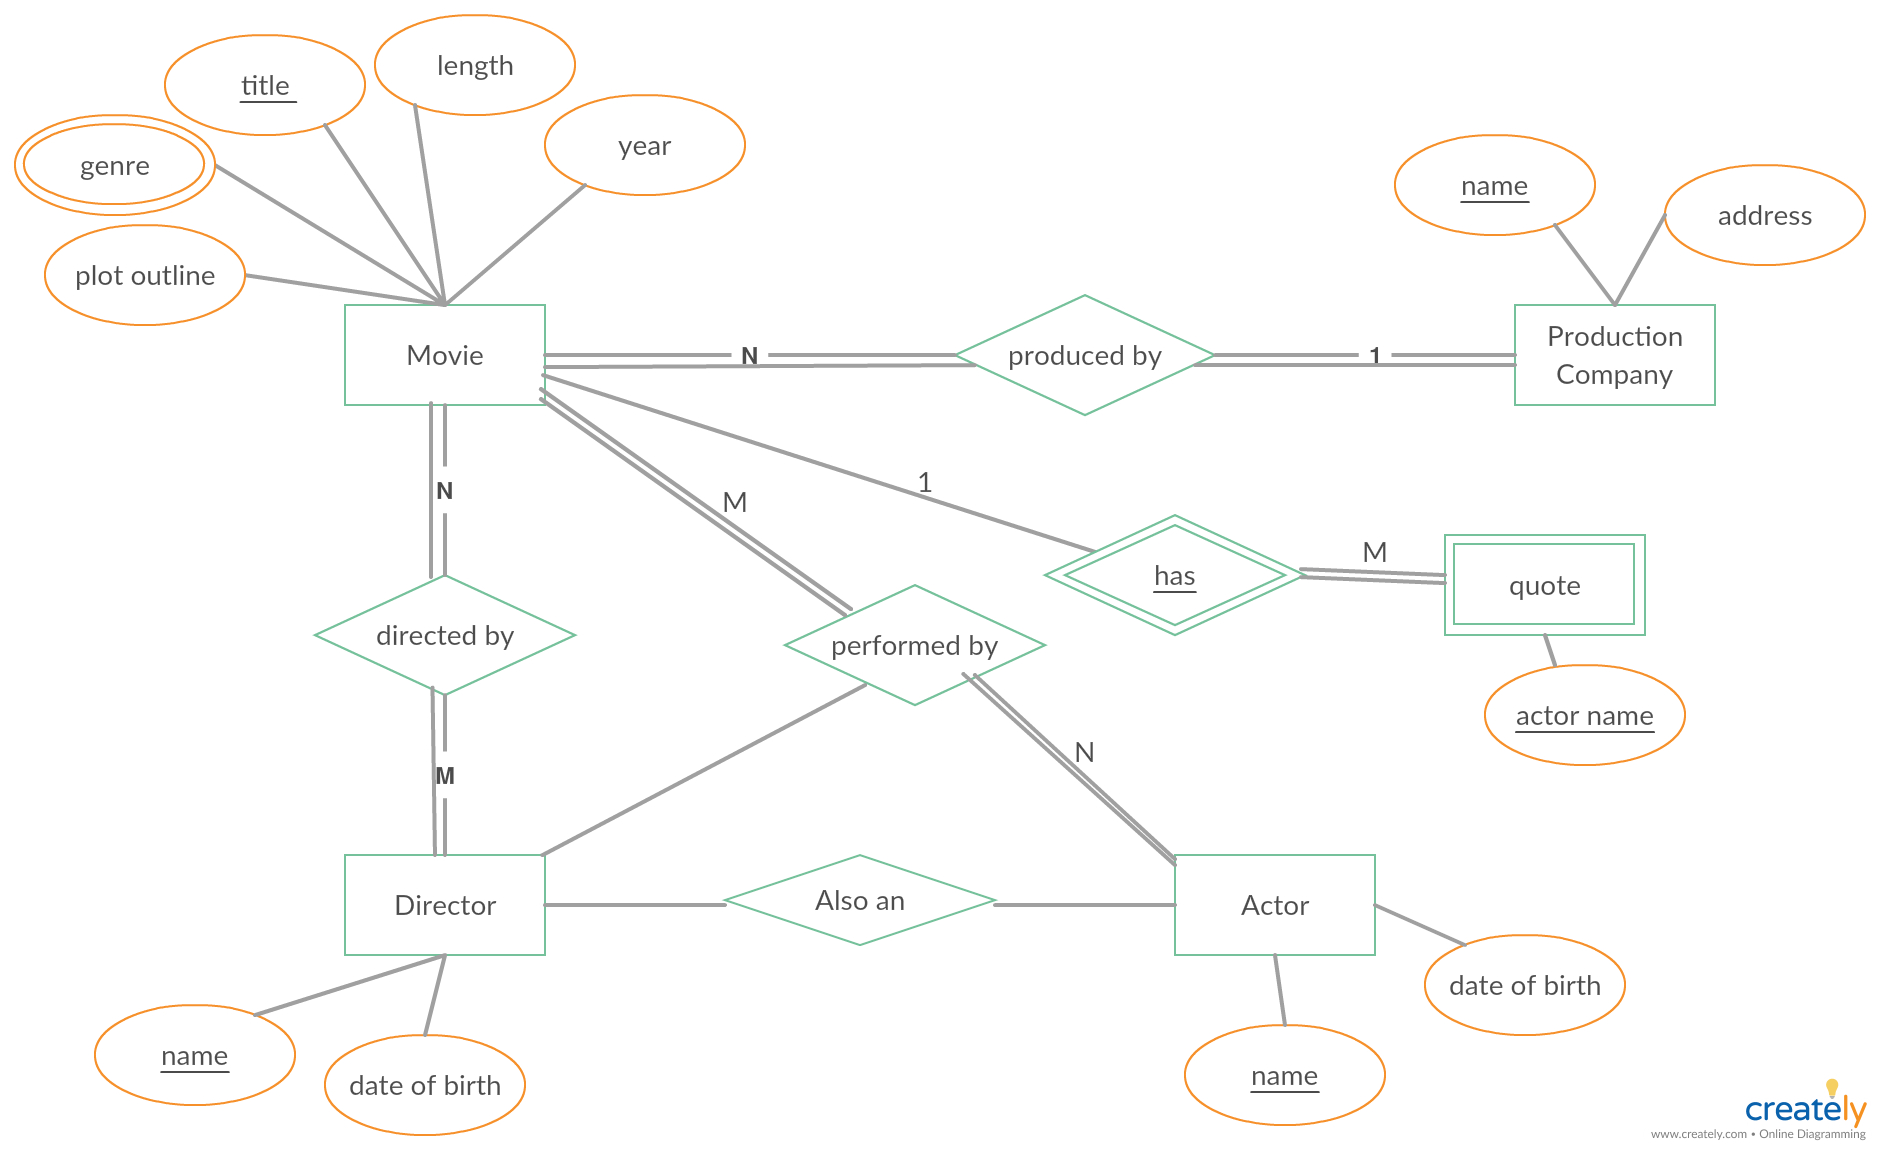 Erd For The Movie Database - You Can Edit This Template And regarding Er Diagramm M Zu N